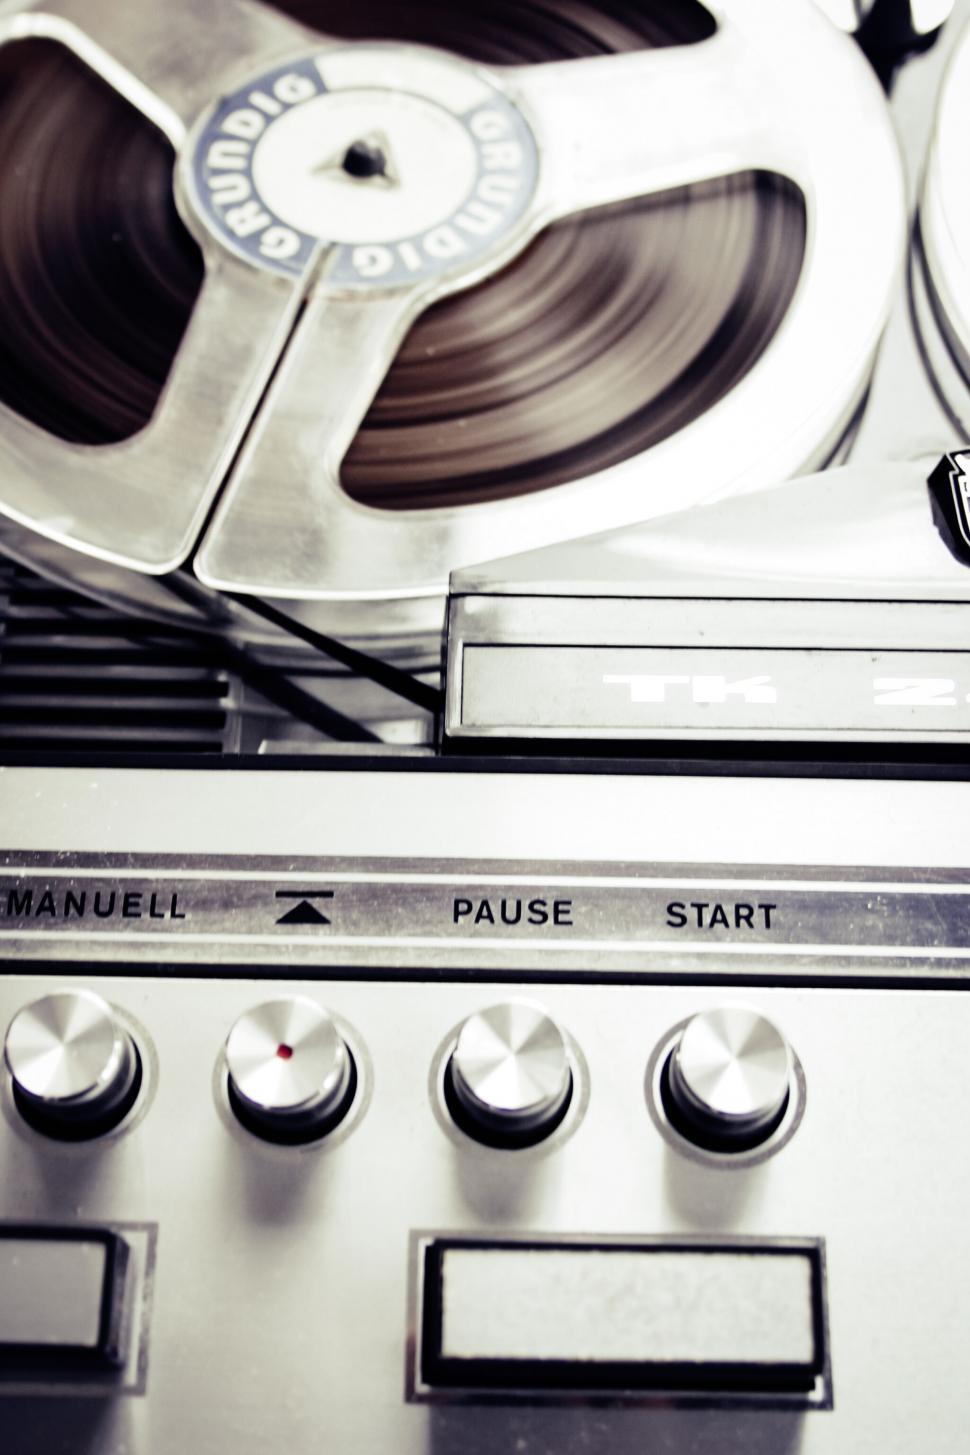 Free Image of Retro reel-to-reel tape recorder close-up 